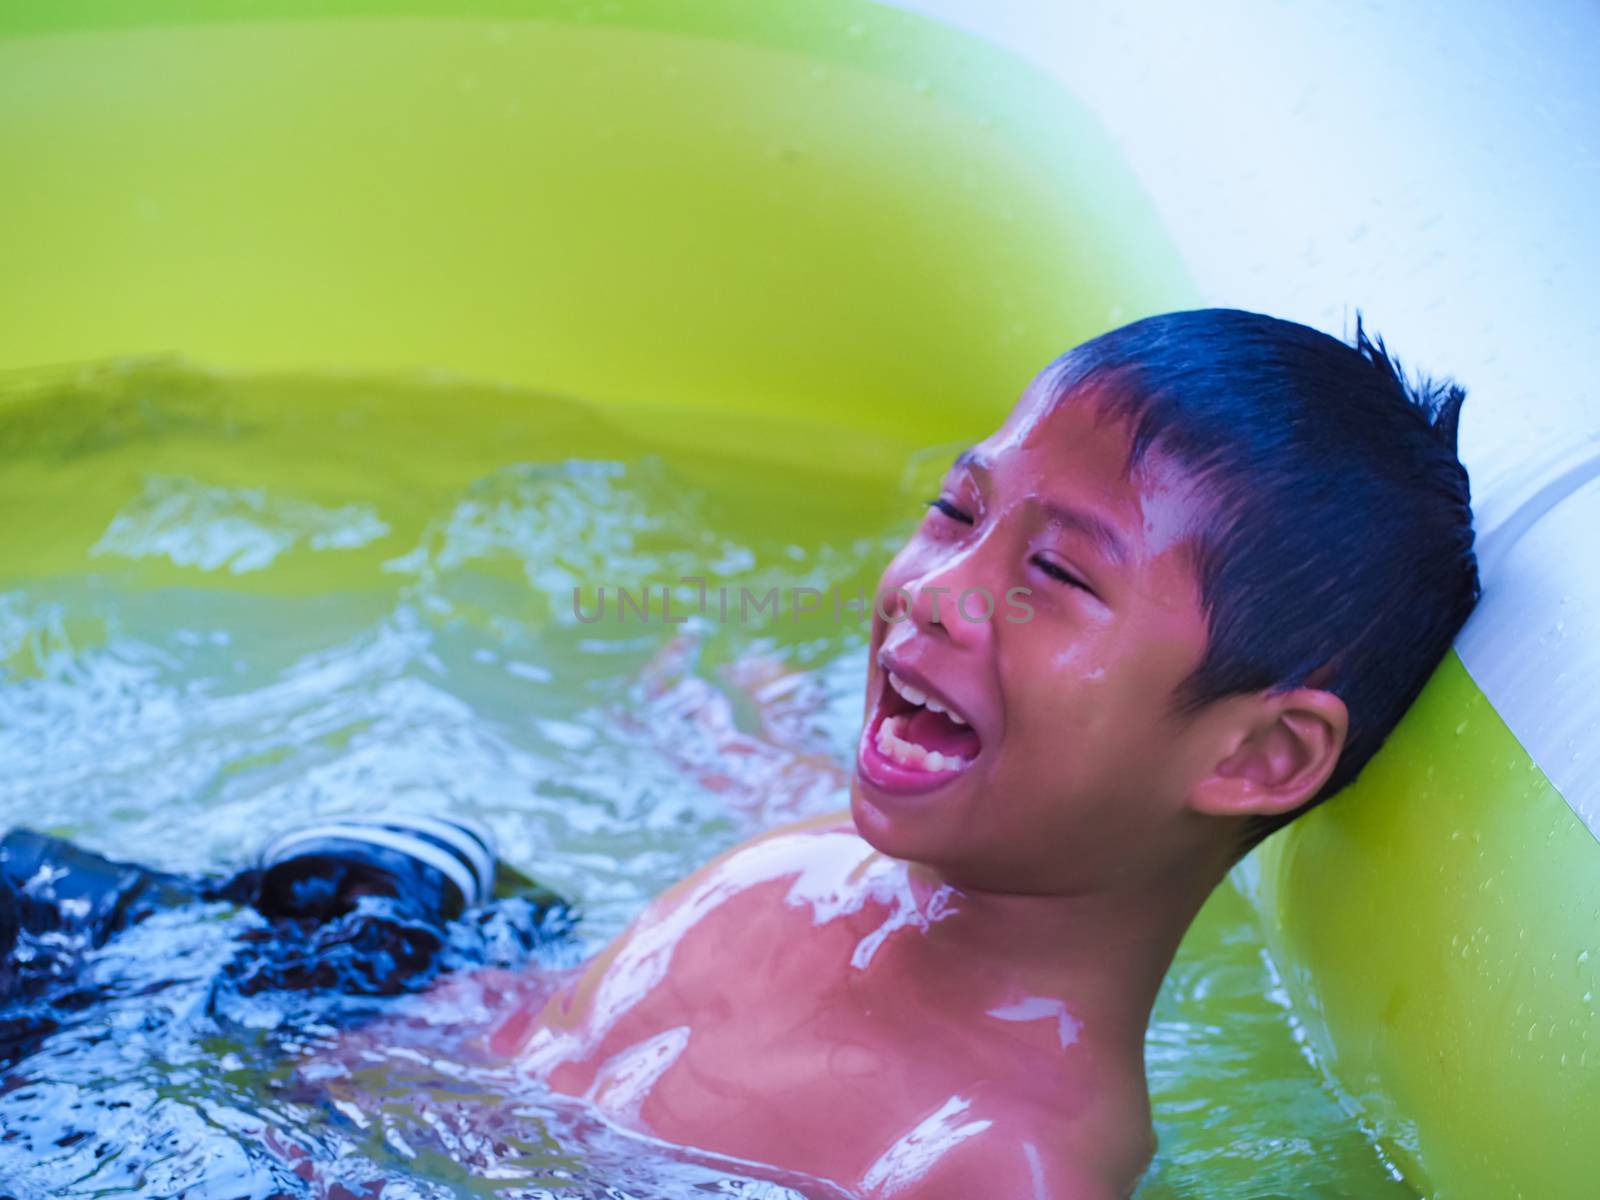 A boy playing in the pool and Smile happily.